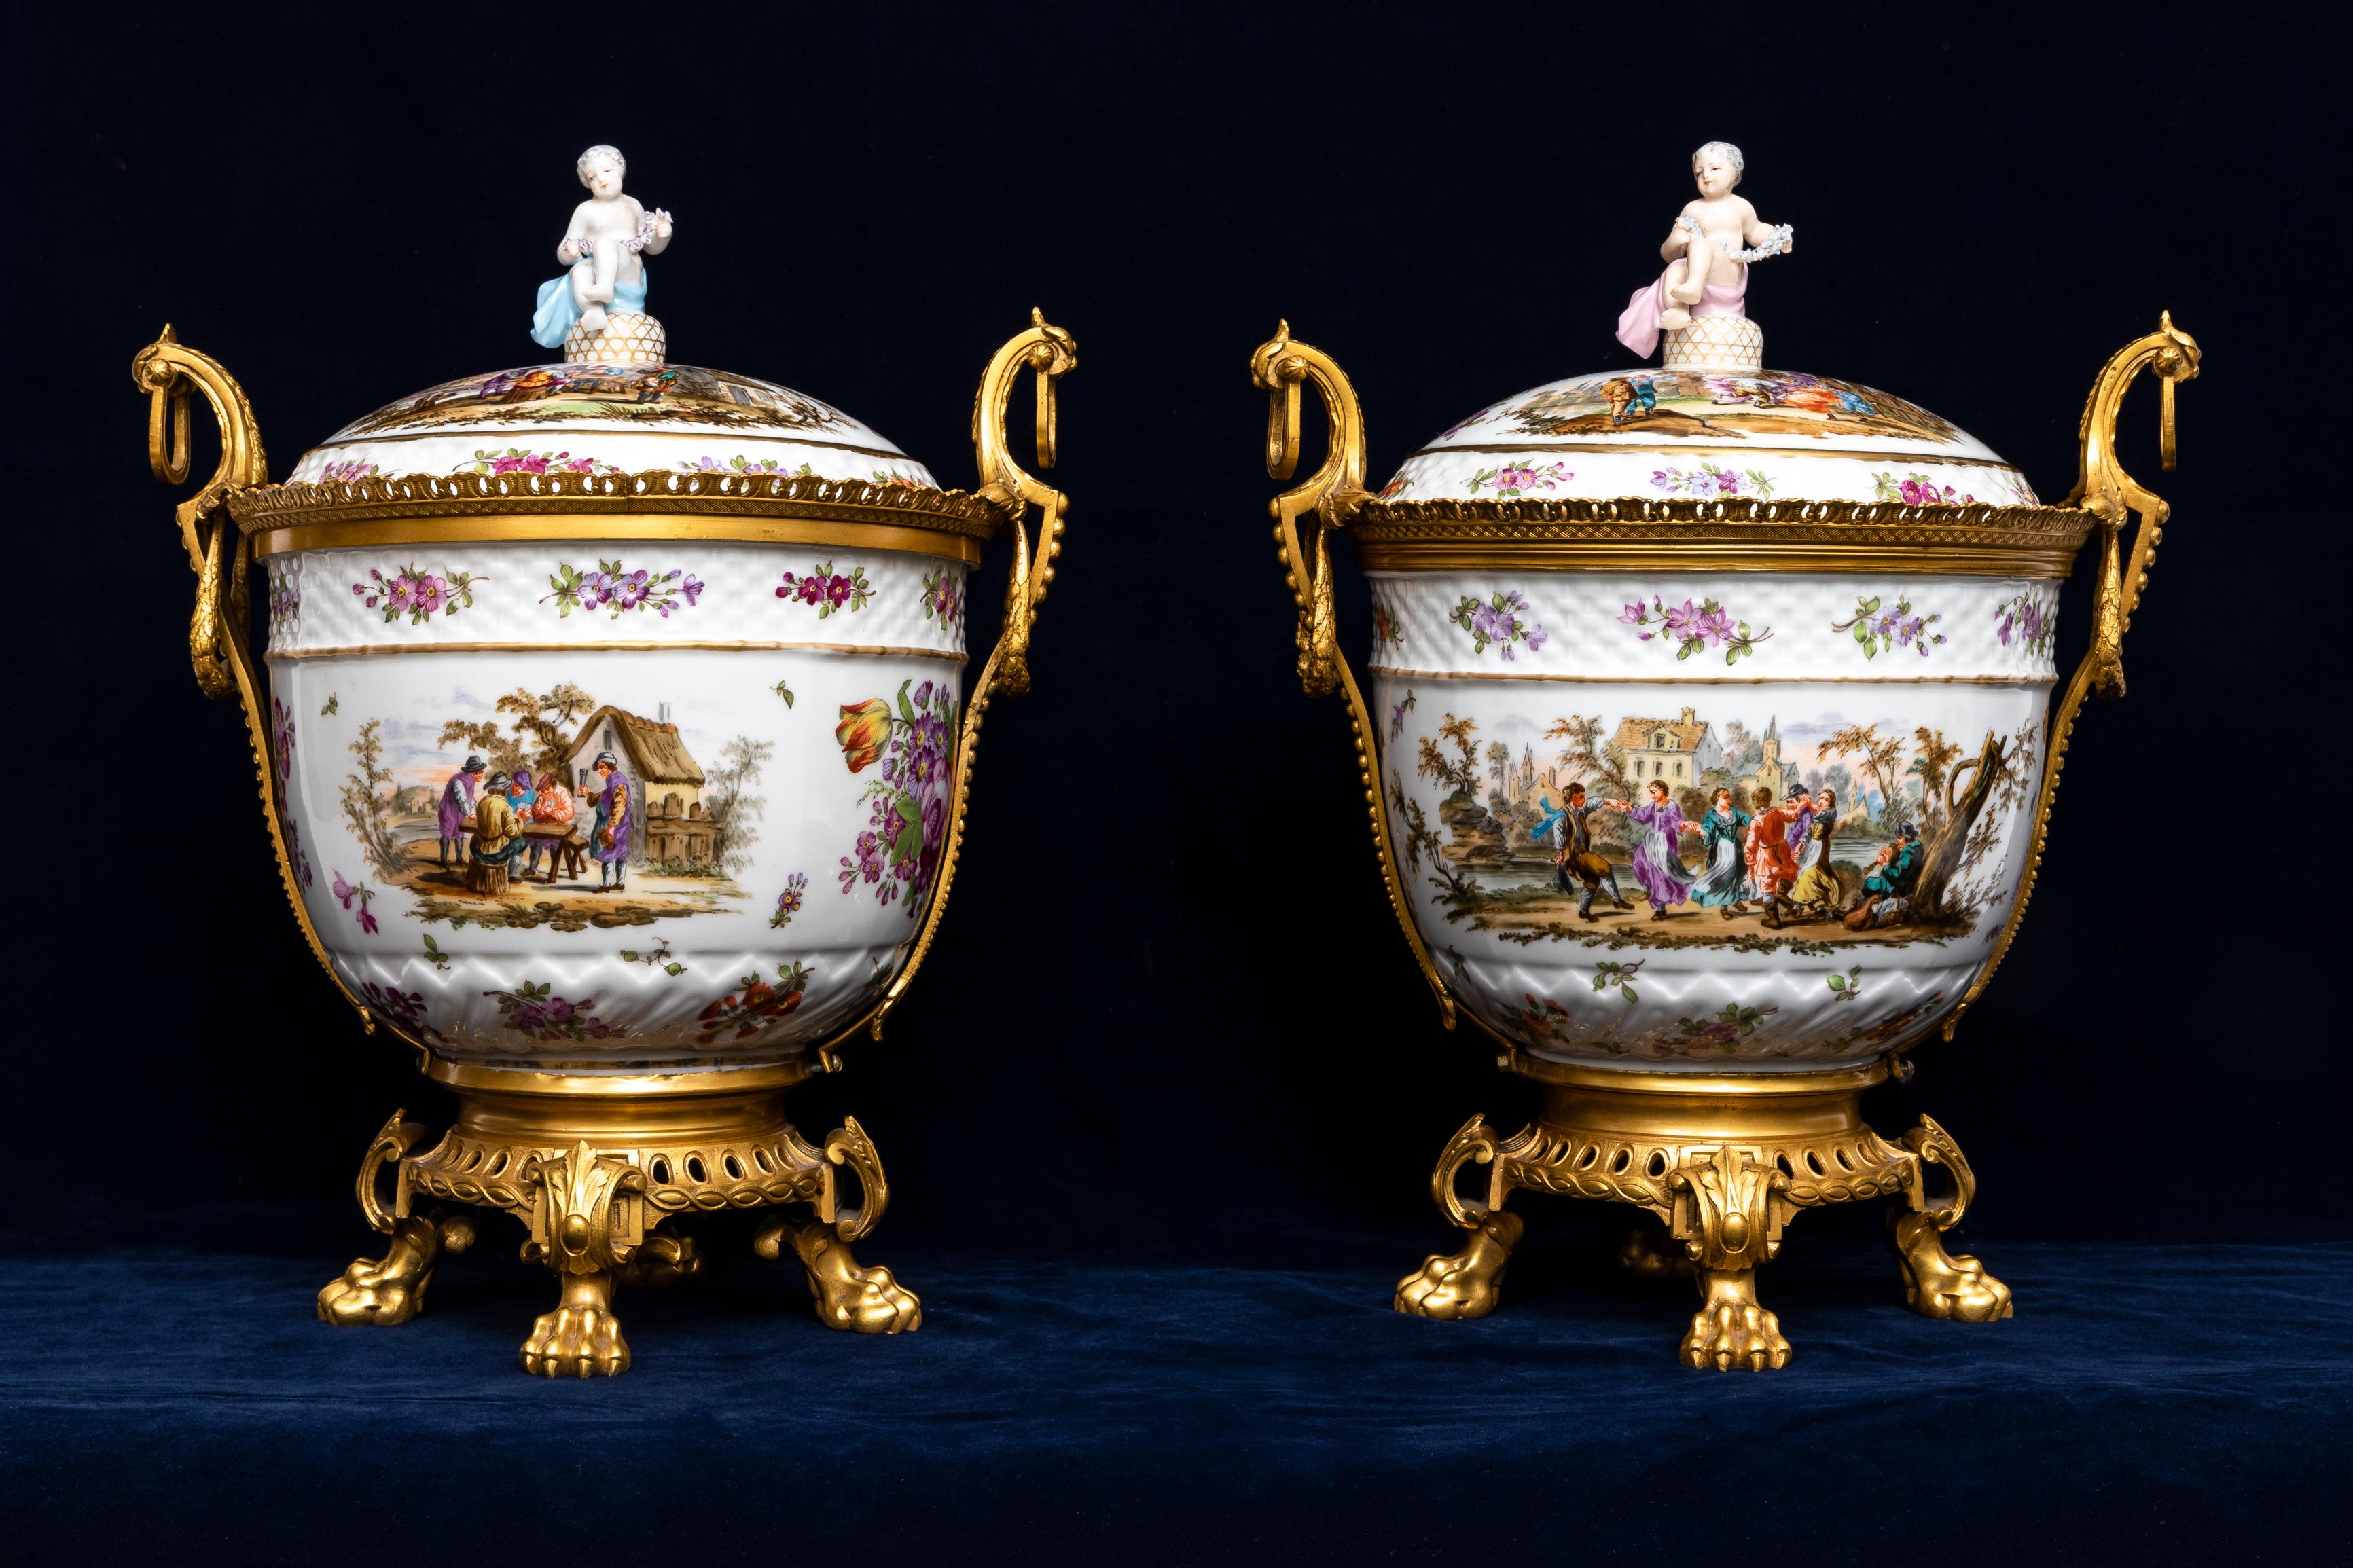 A Pair of 18th Century Meissen Porcelain Marcolini Period Covered Tureens with 19th Century French Ormolu Mounts.  These tureens show the combination of iconic French and German porcelain trends.  Produced by Meissen under the direction of